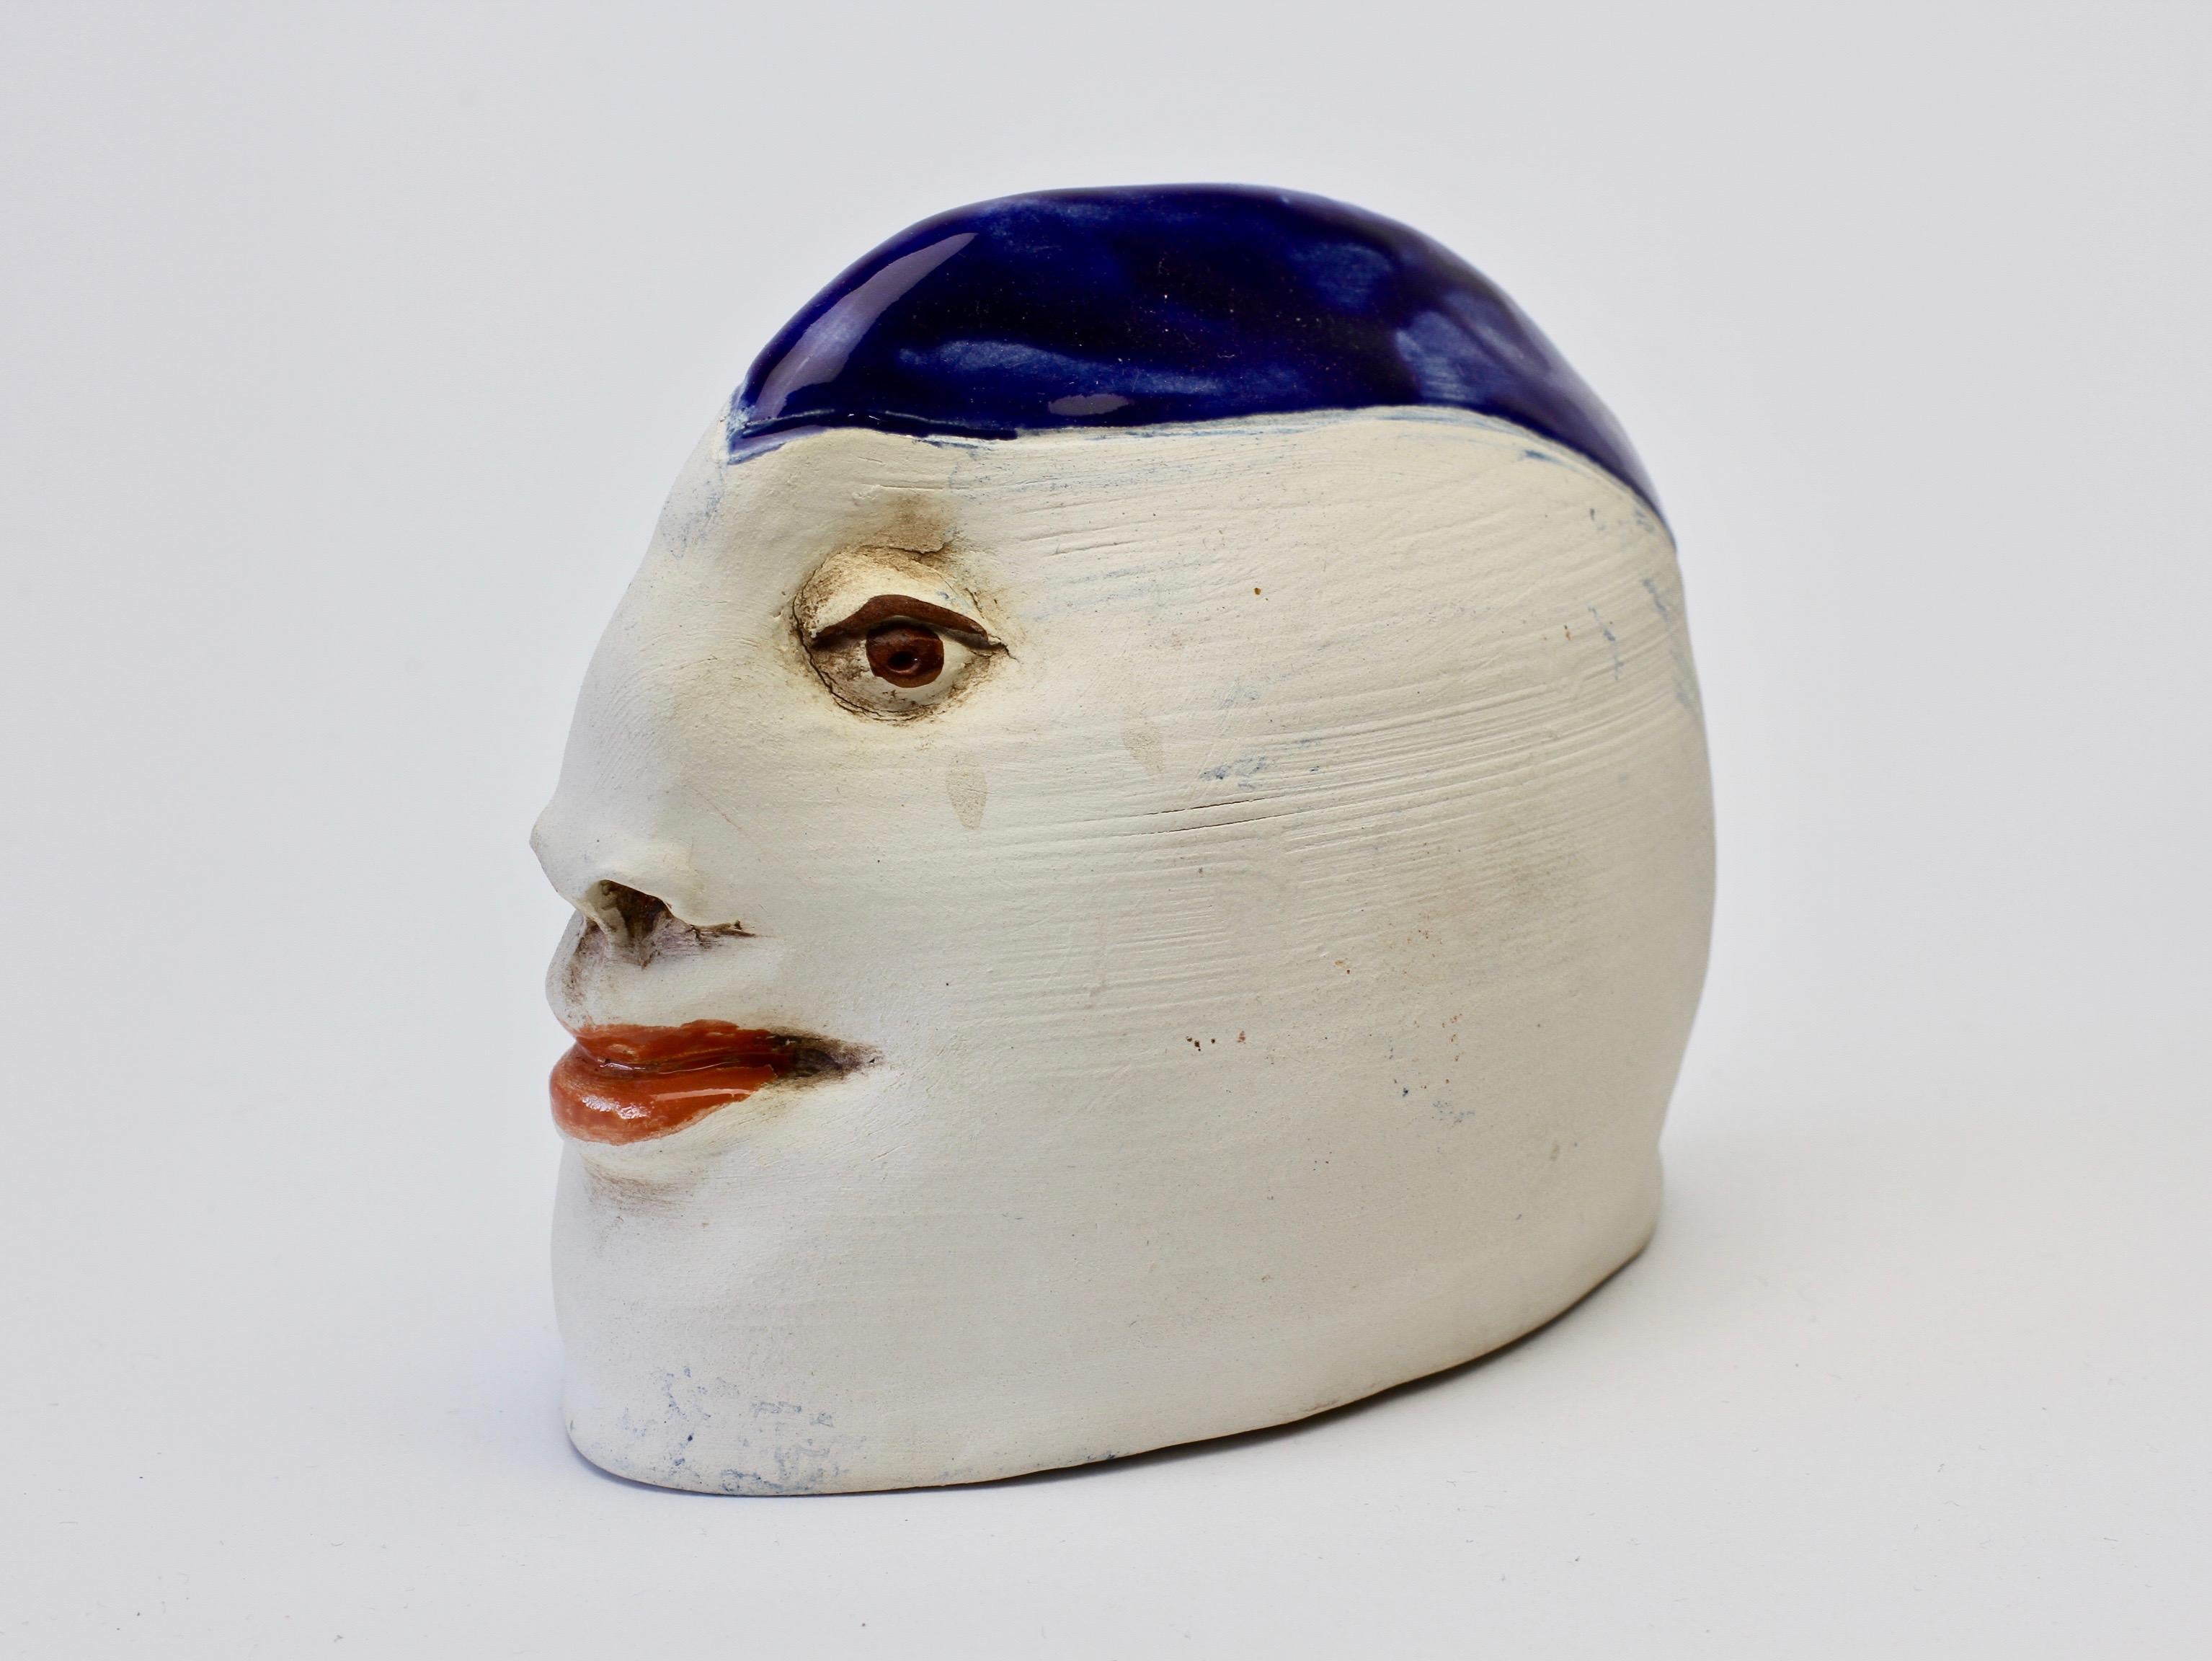 Unusual Quirky Vintage Hand Thrown Glazed Pottery Sculpture of a Head with Face  (Keramik)